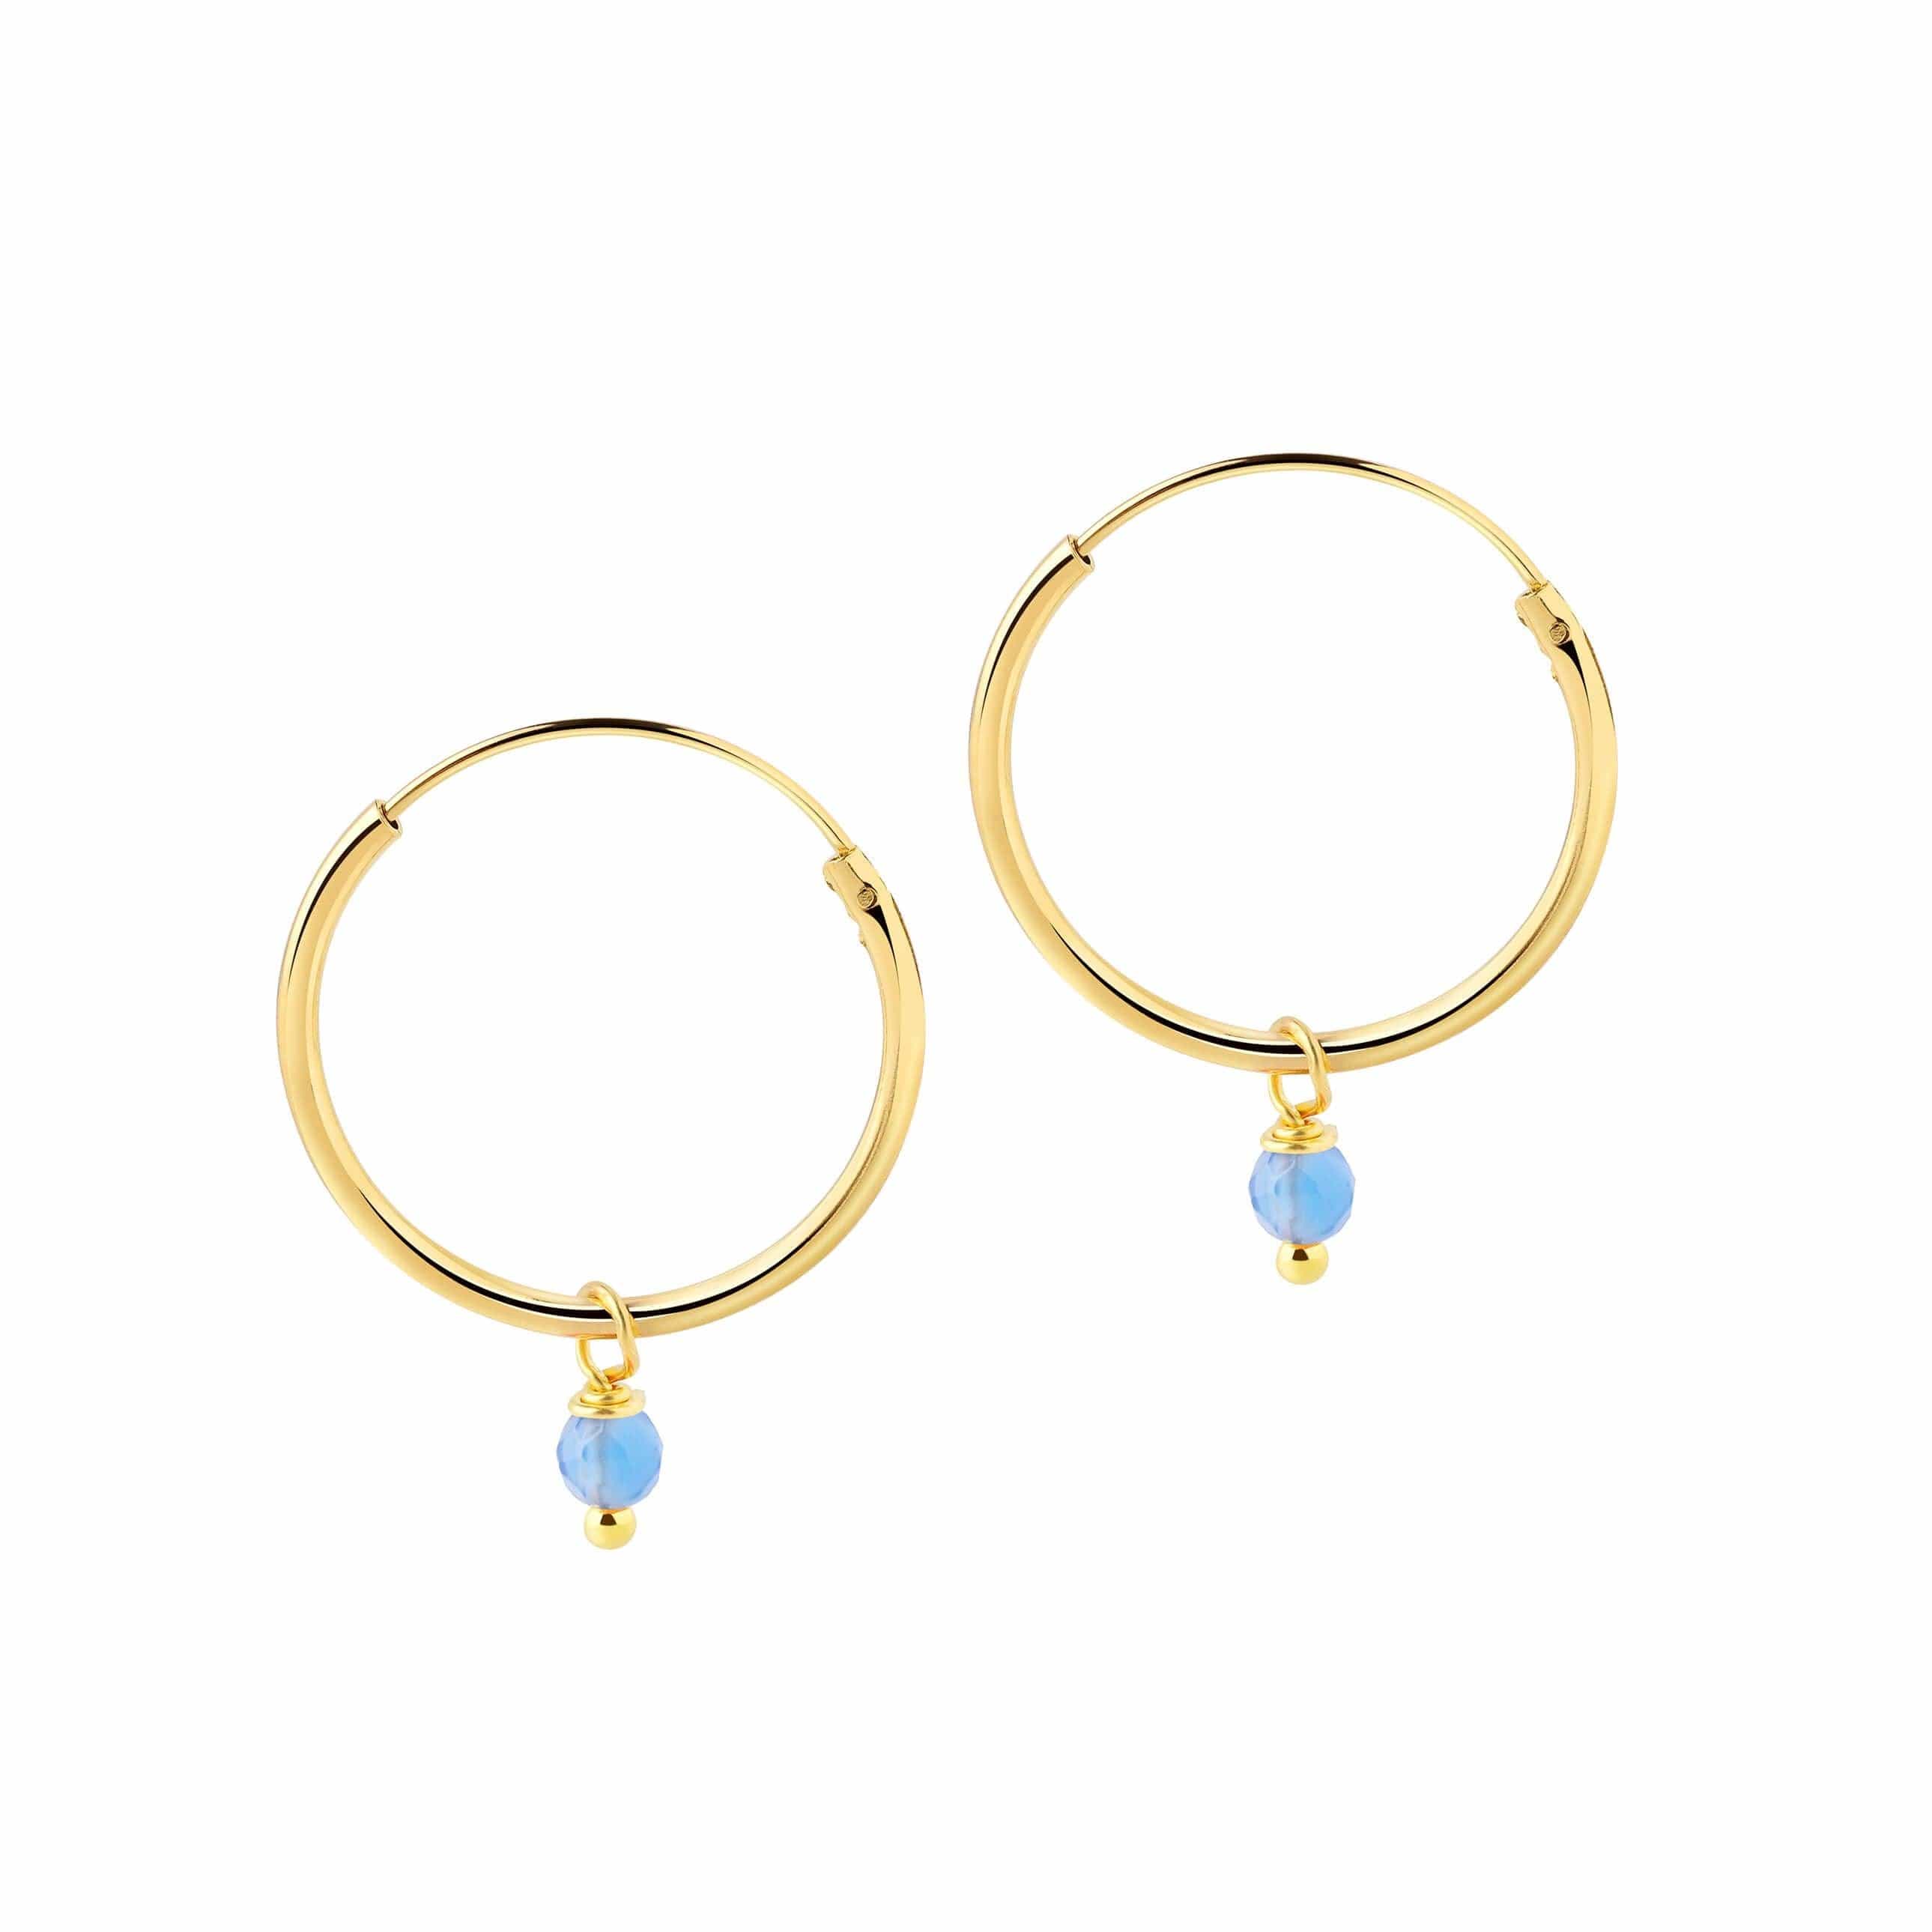 18mm Gold Plated Hoop Earrings with Blue Stone